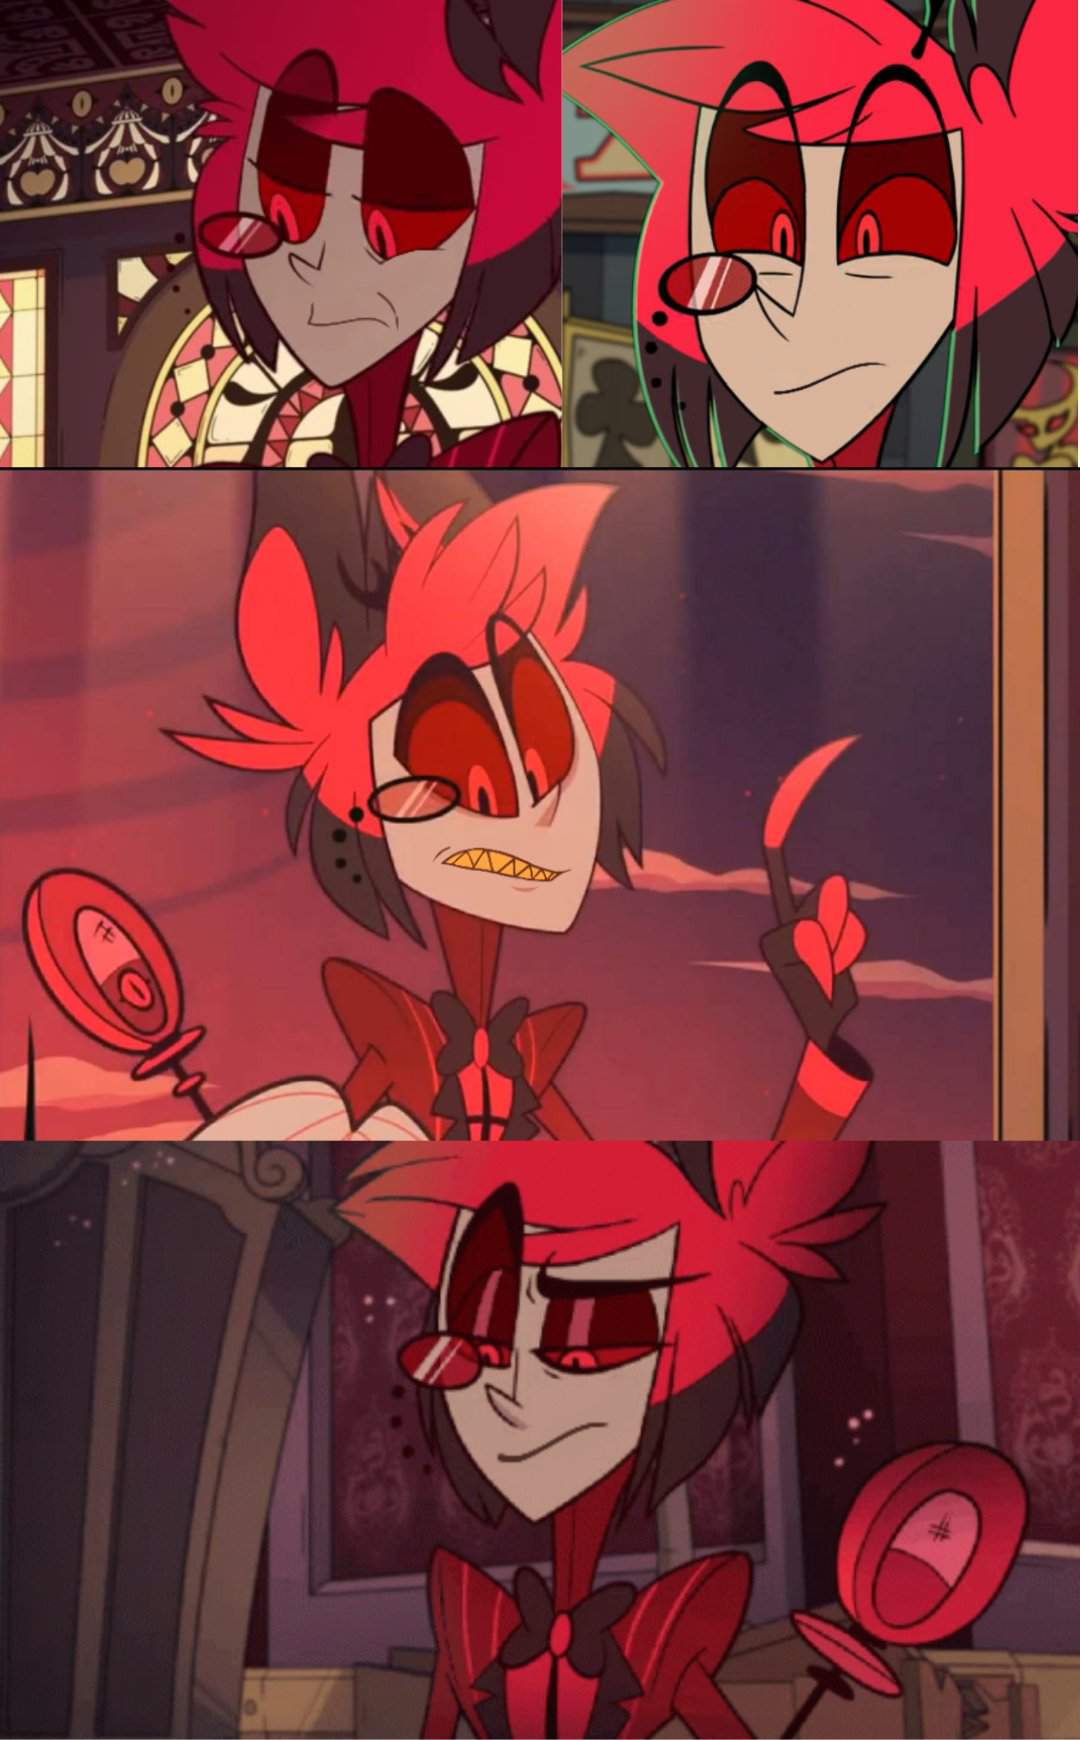 I put frowns on Alastor now he looks weird | Hazbin Hotel (official) Amino